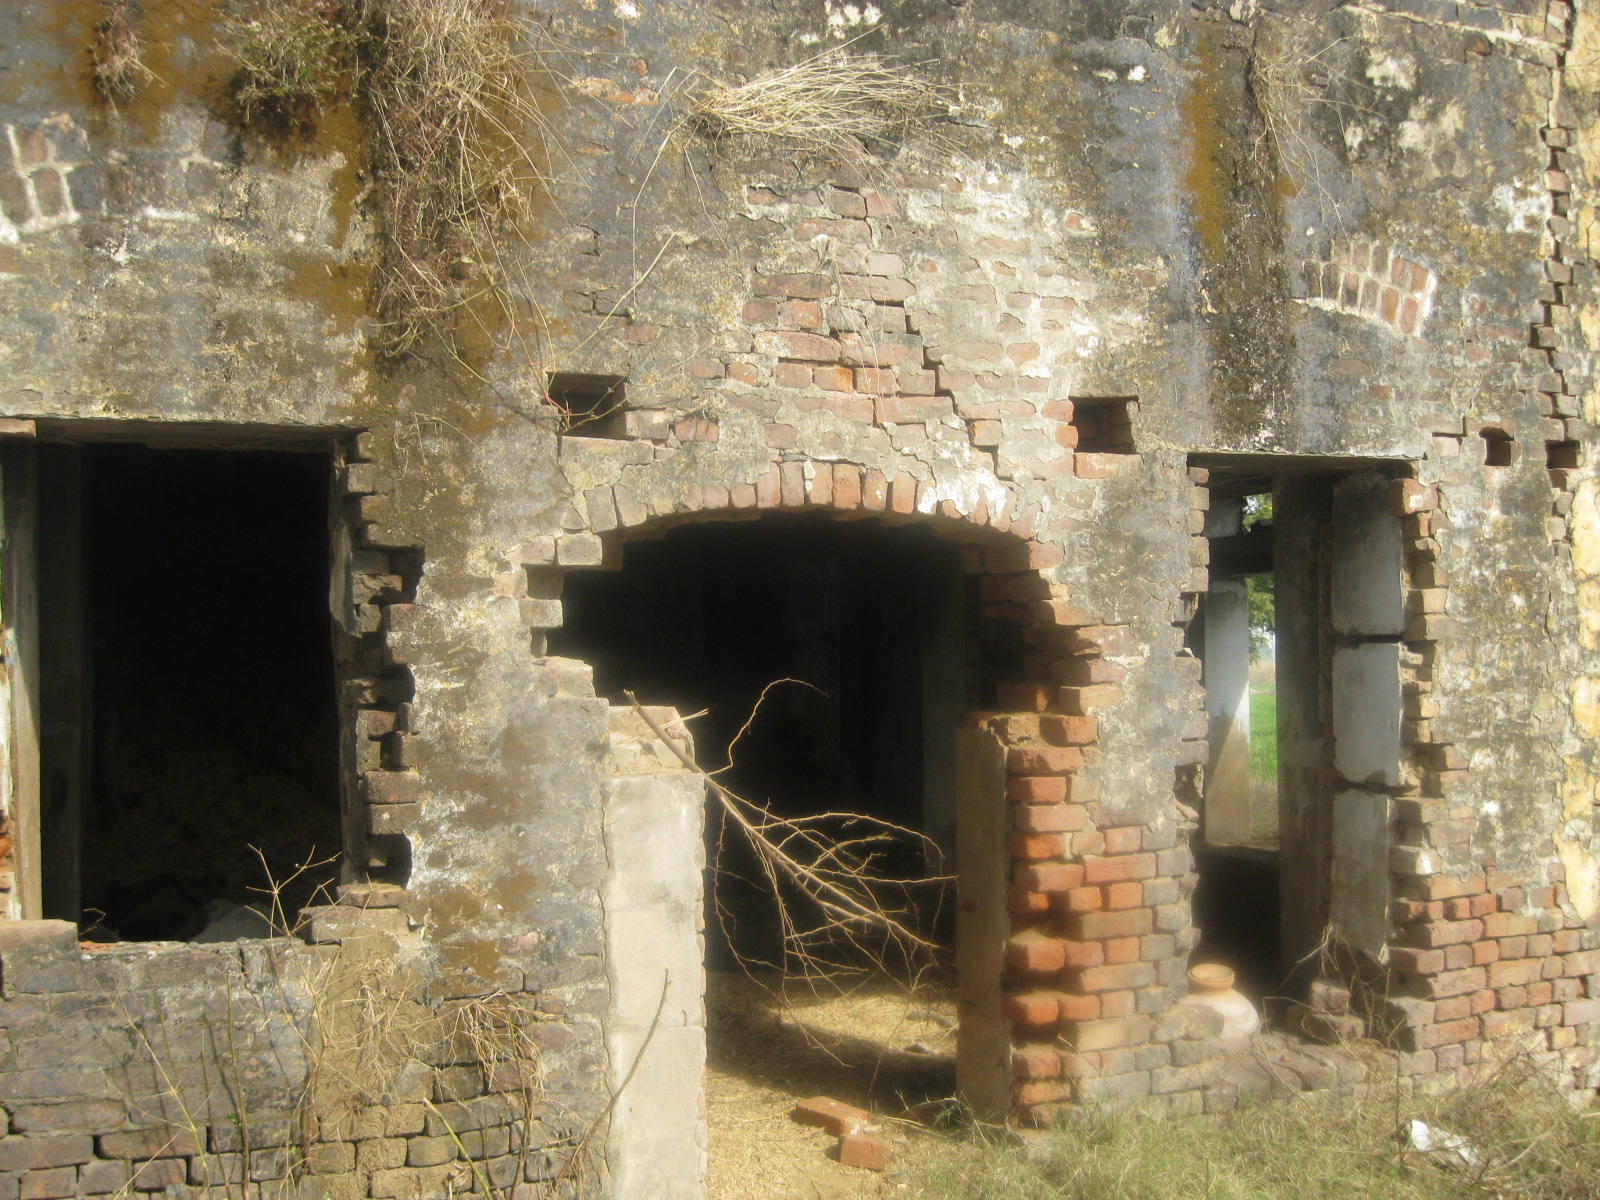 Ruins of Sikh Village Hondh Chillar, Haryana that was totally destroyed during Sikh Genocide 1984.